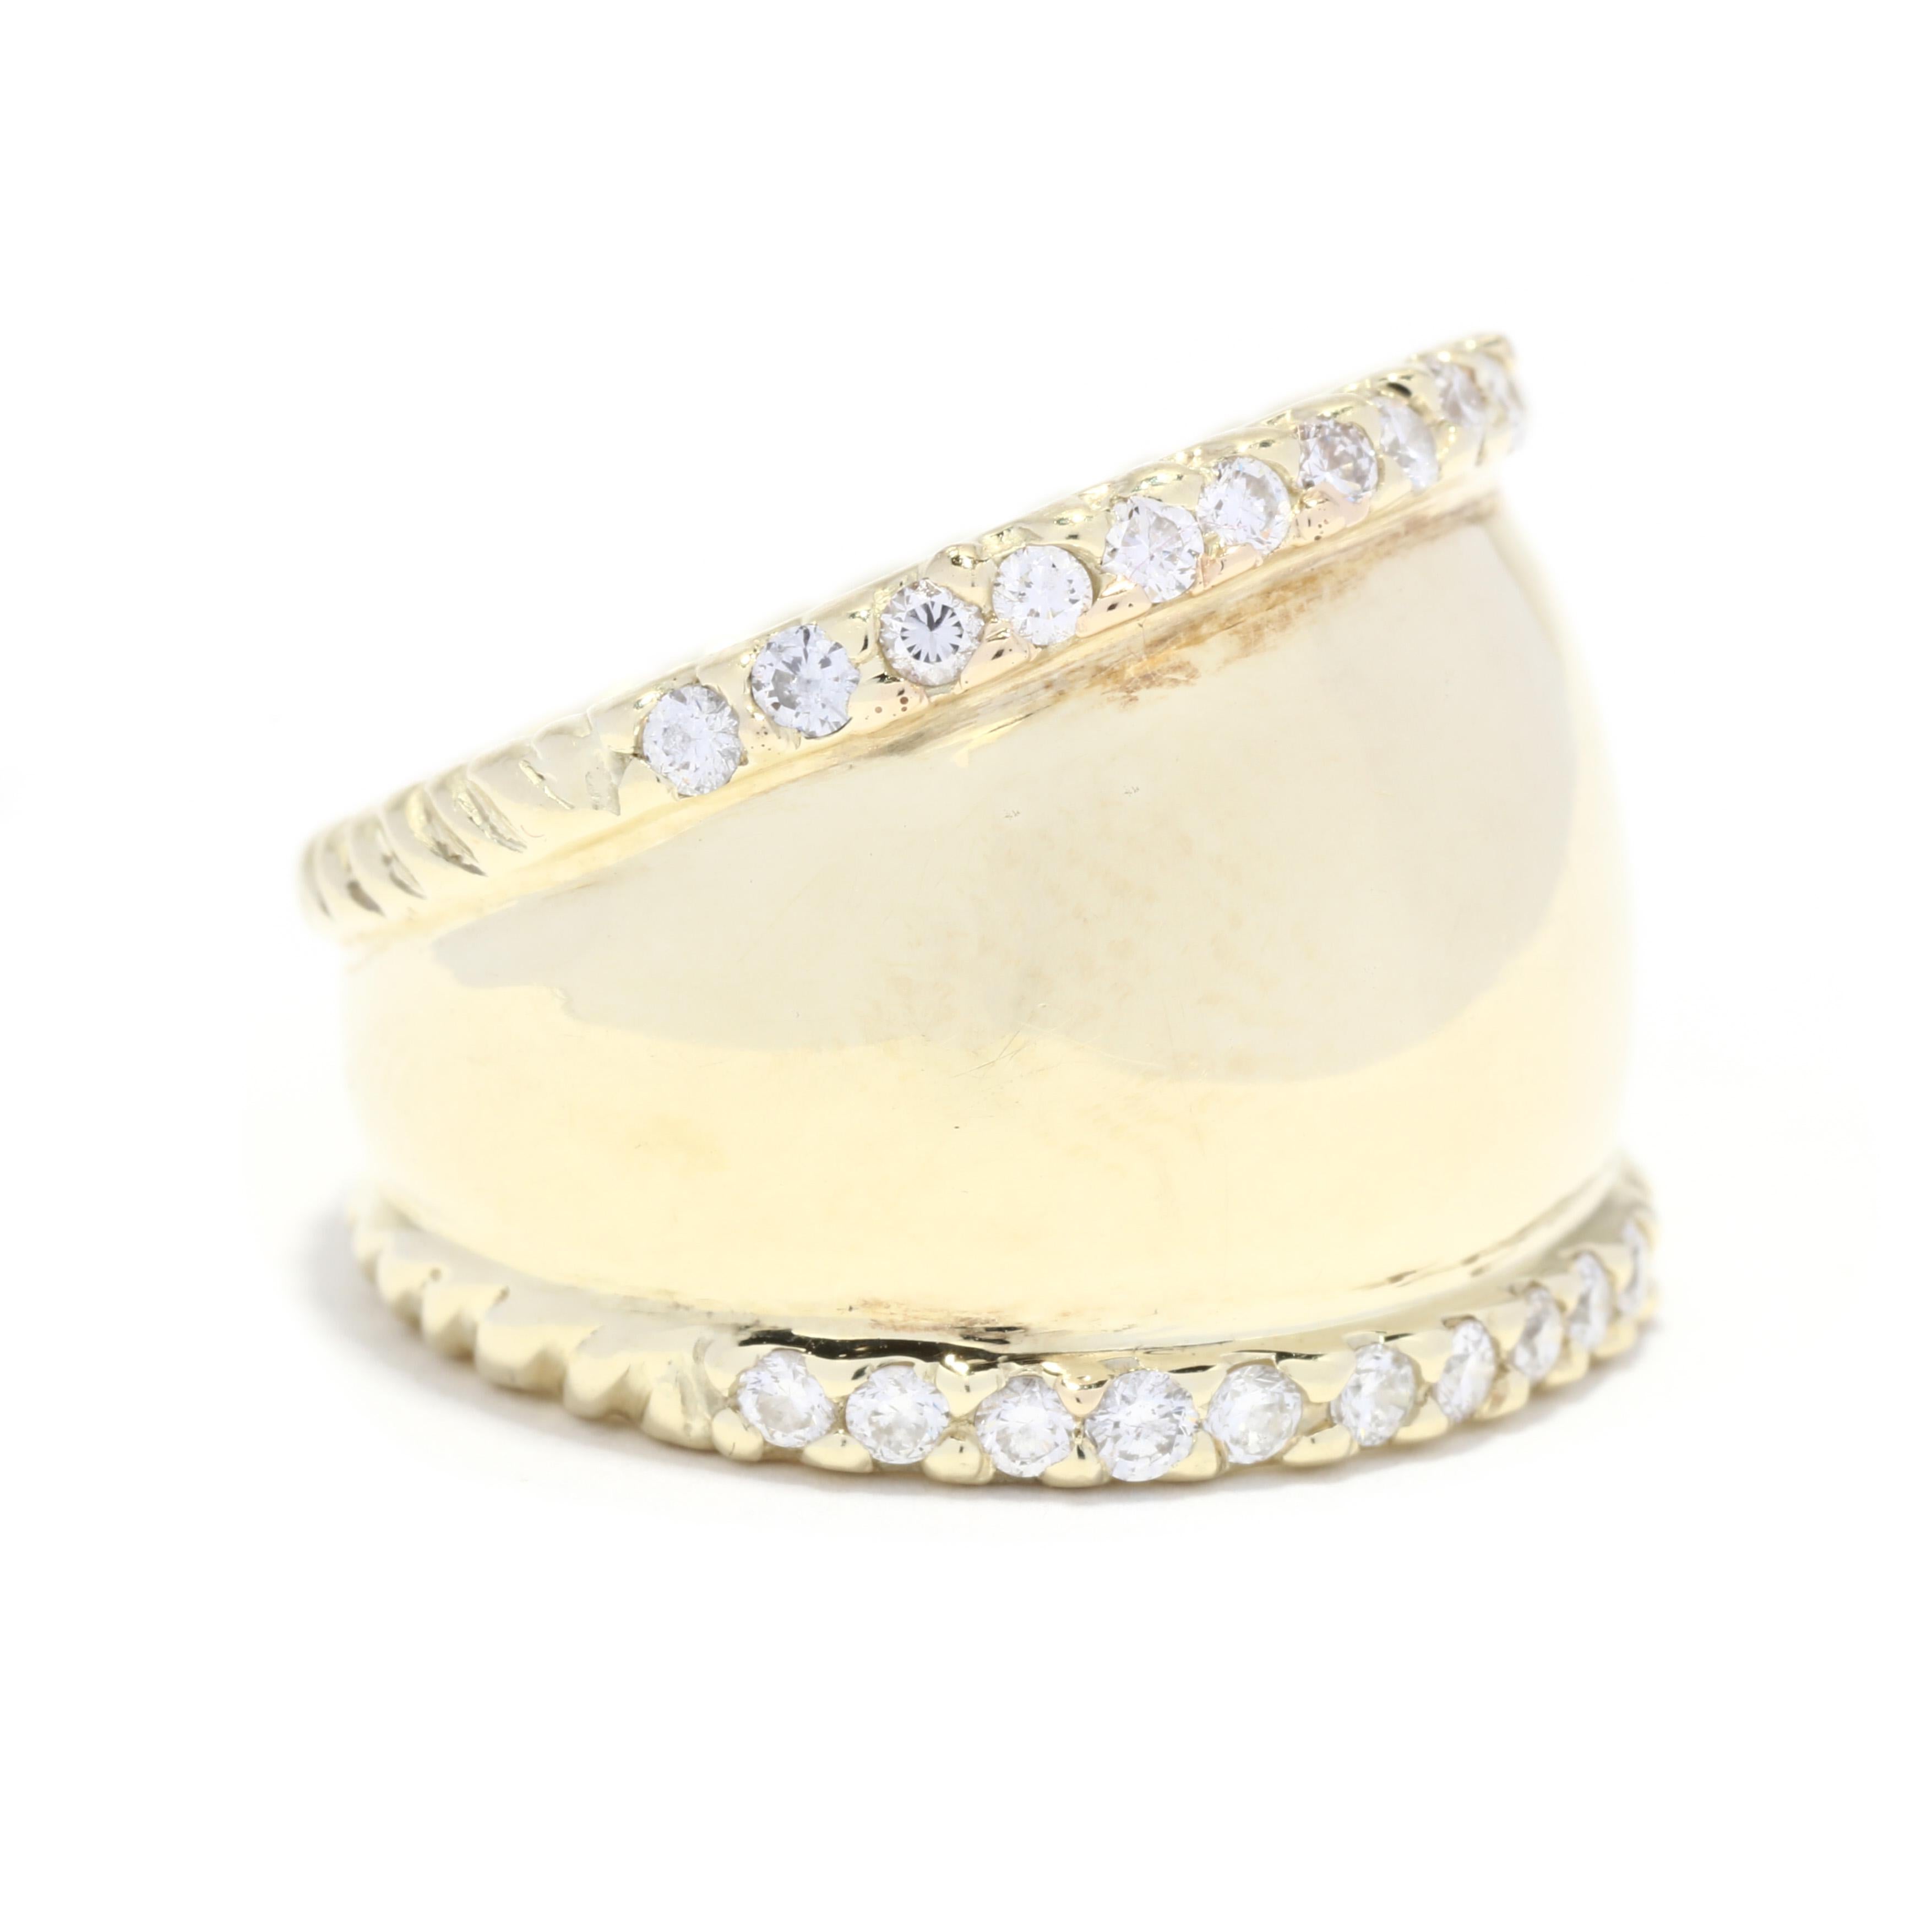 A new 14 karat yellow gold natural diamond tapered signet band. This ring features a slightly domed, tapered band that is engraveable with a row of pavé diamonds on either side weighing approximately .60 total carats and with cable motif on the